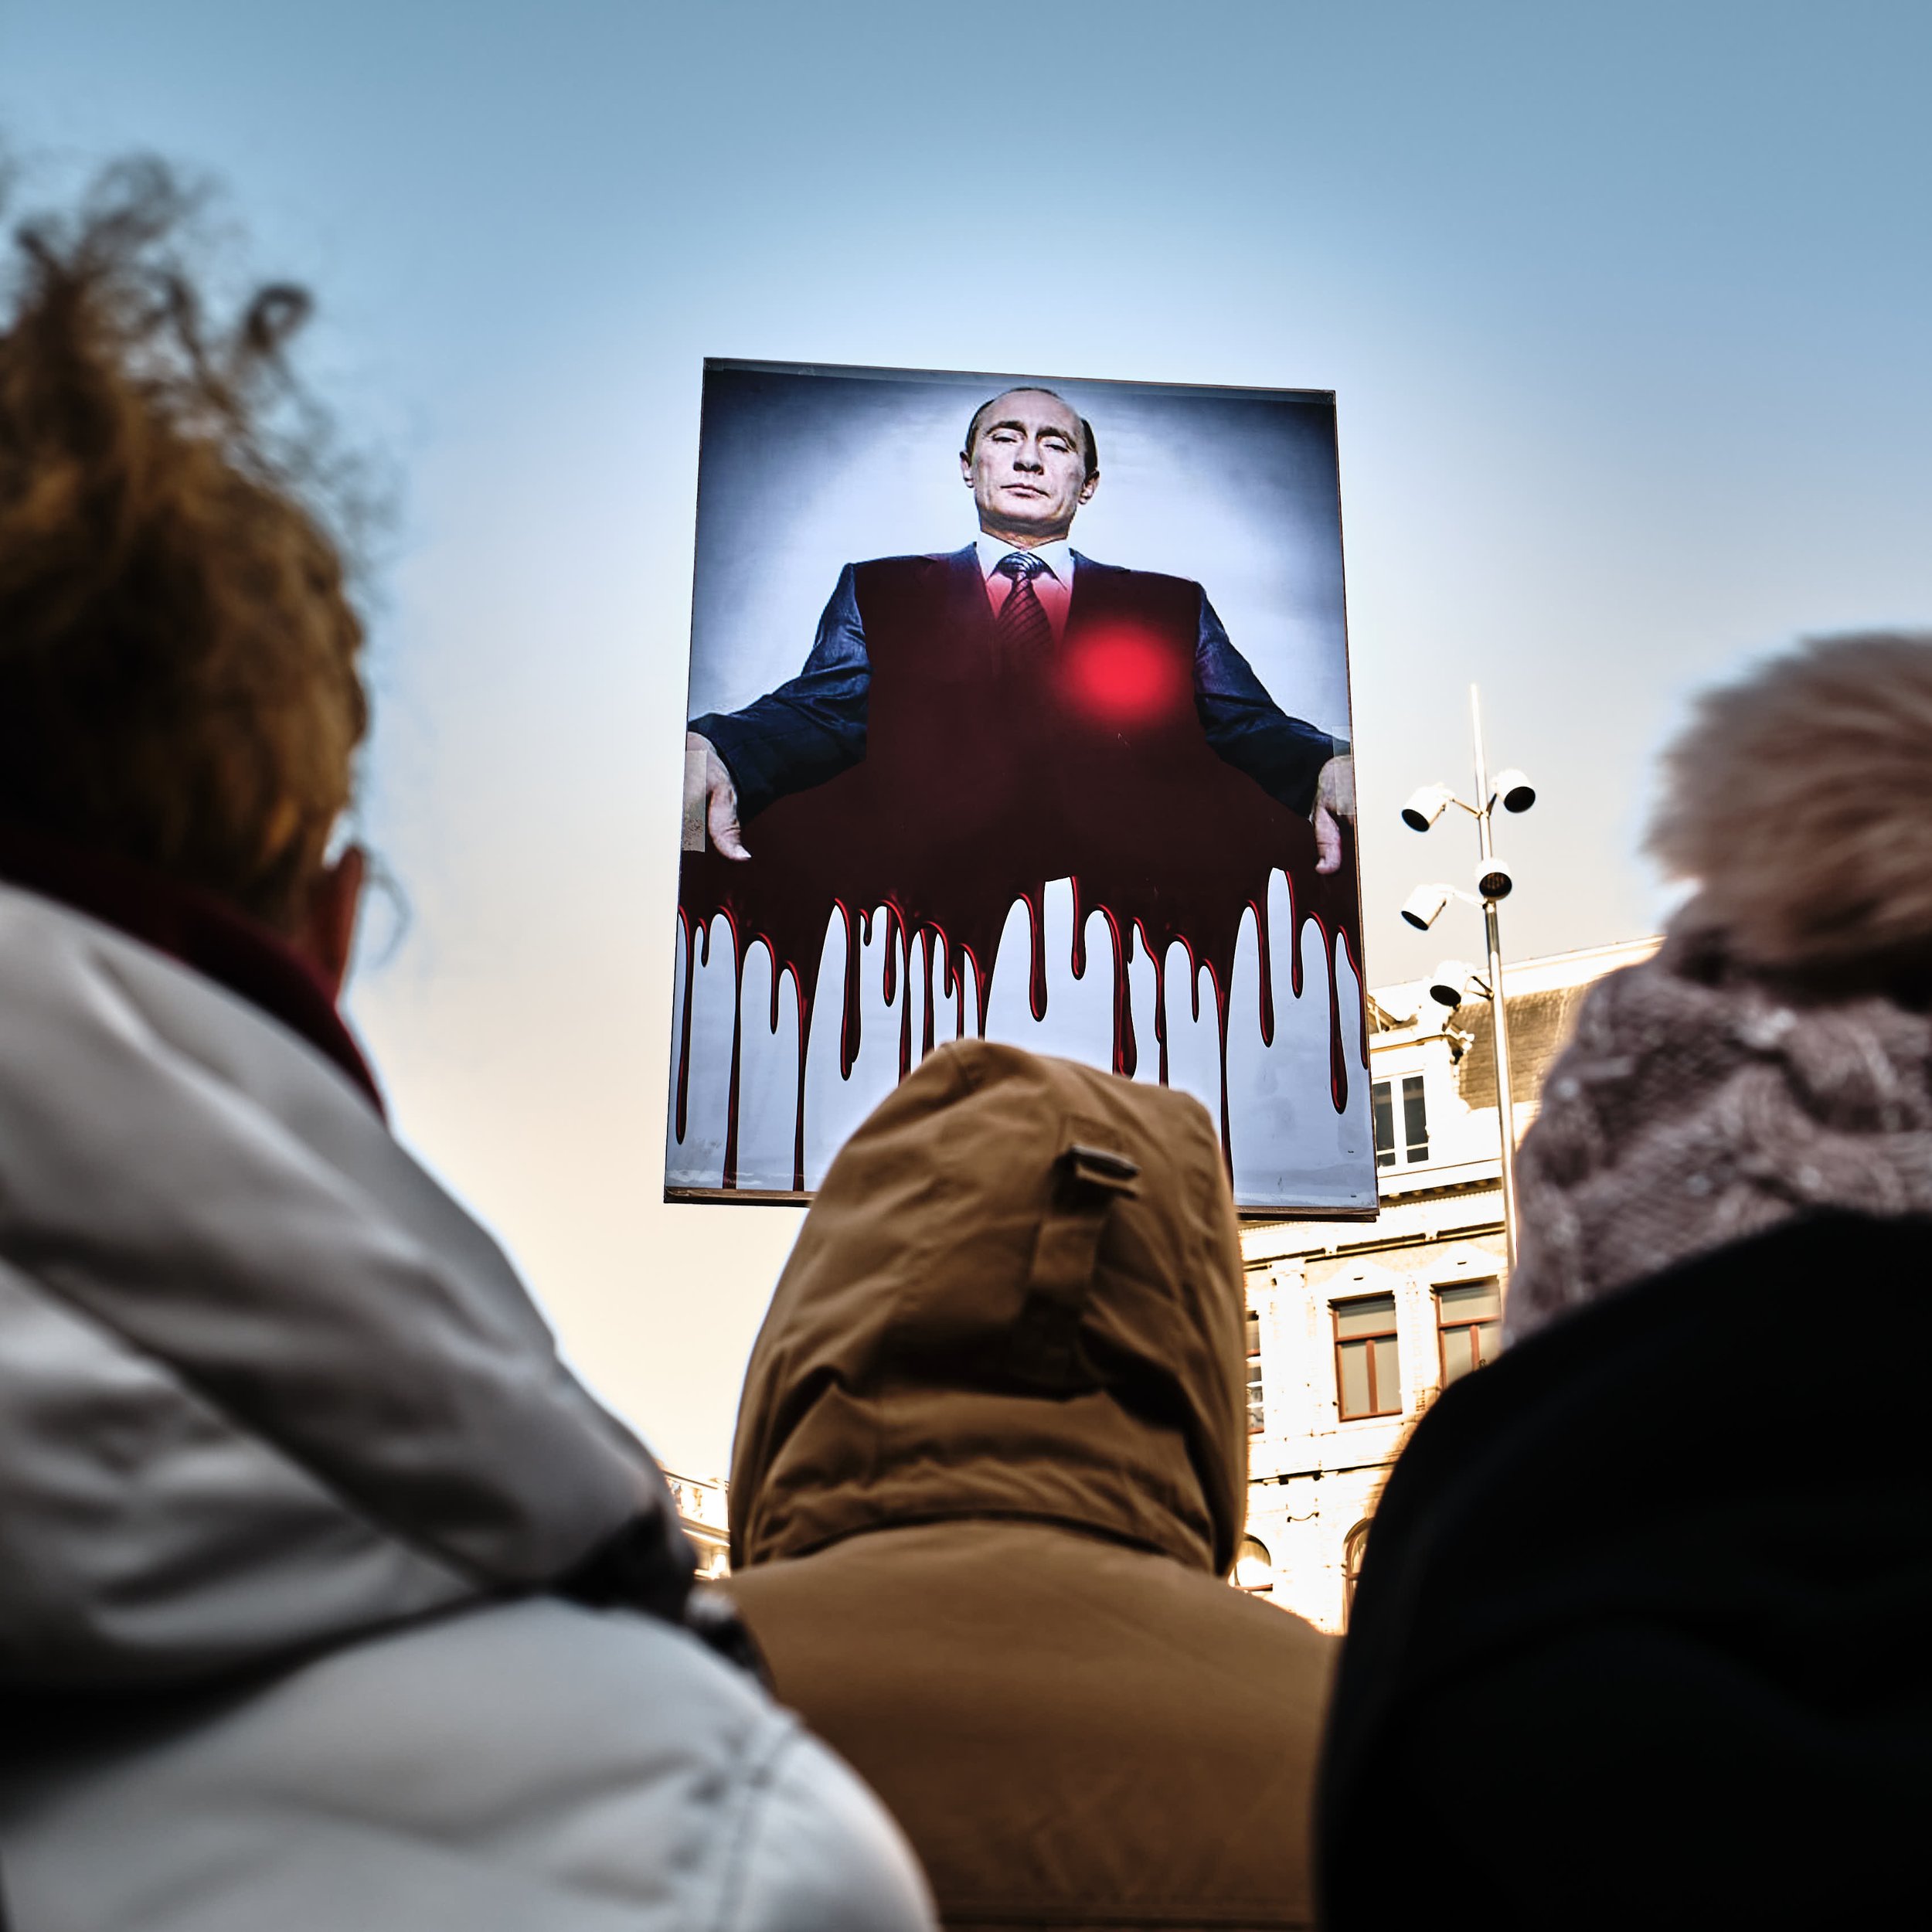  People protesting against Putin and the war he started in the Ukraine.  